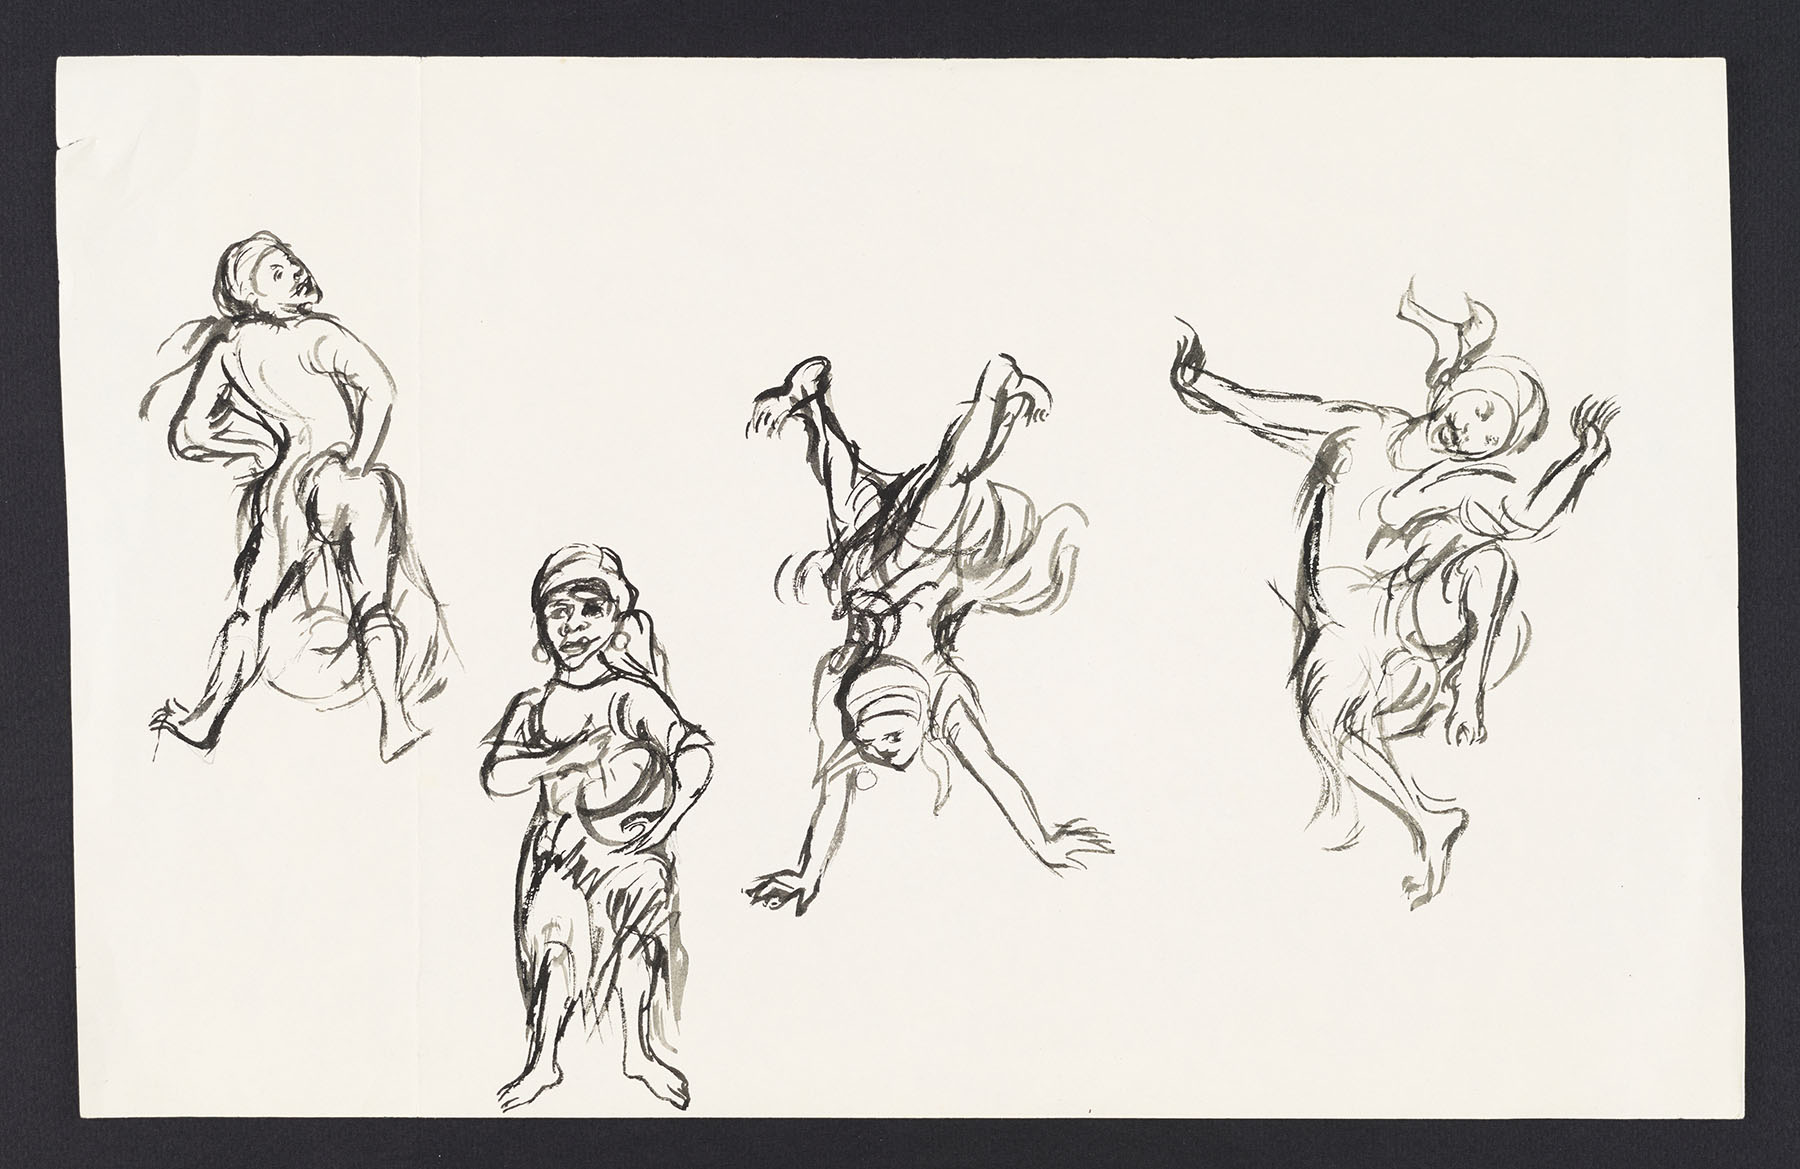 Four sketches of the Dancing Granny by Ashley Bryan